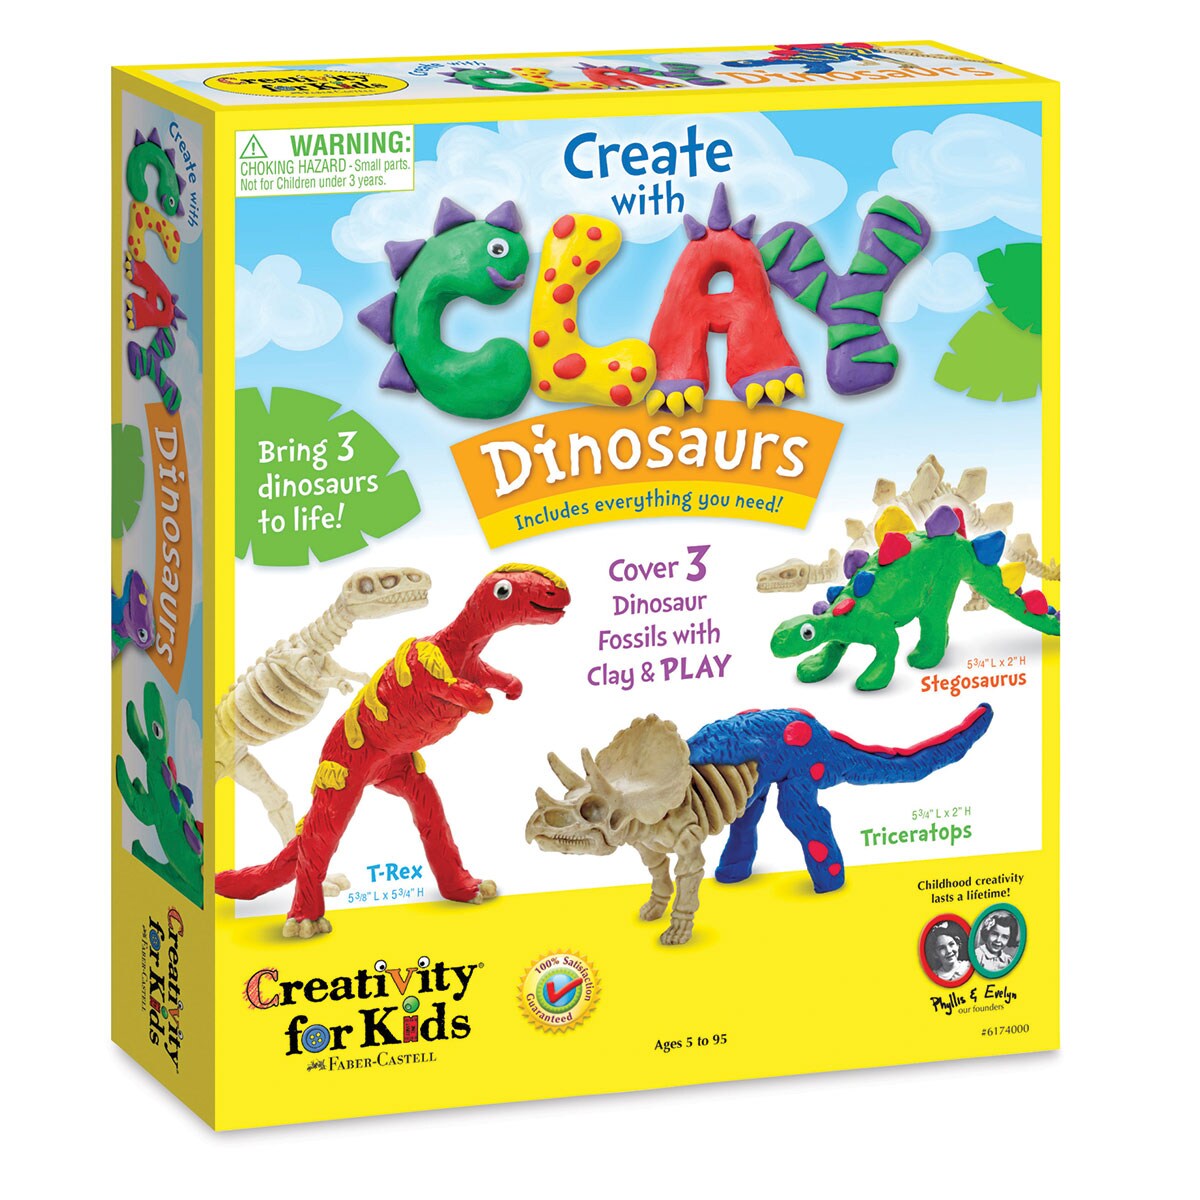 Creativity for Kids Create with Clay - Dinosaurs